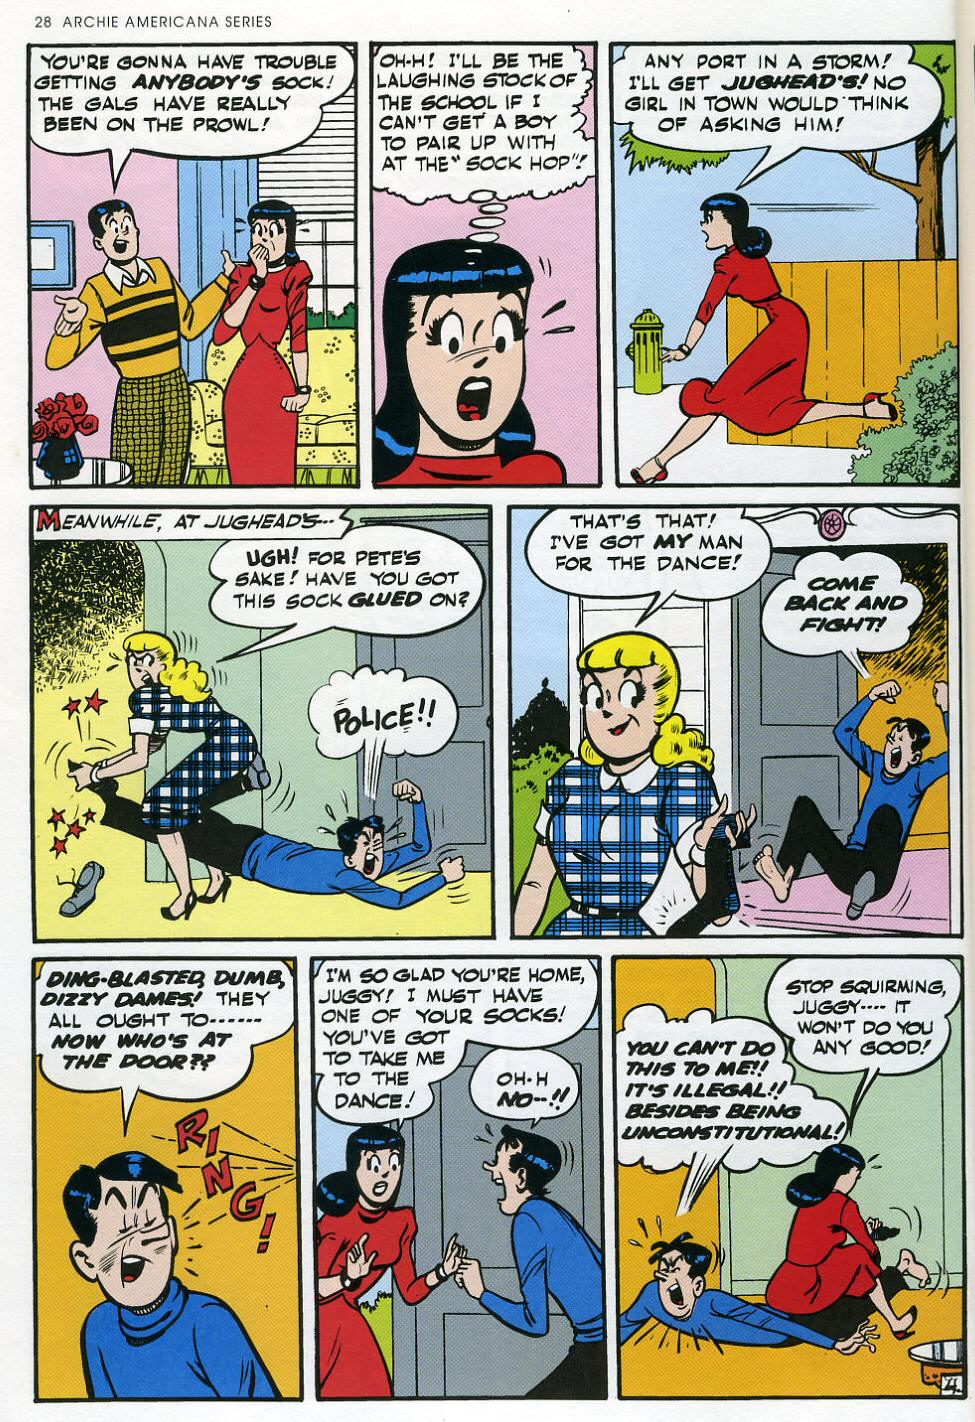 Read online Archie Americana Series comic -  Issue # TPB 2 - 30